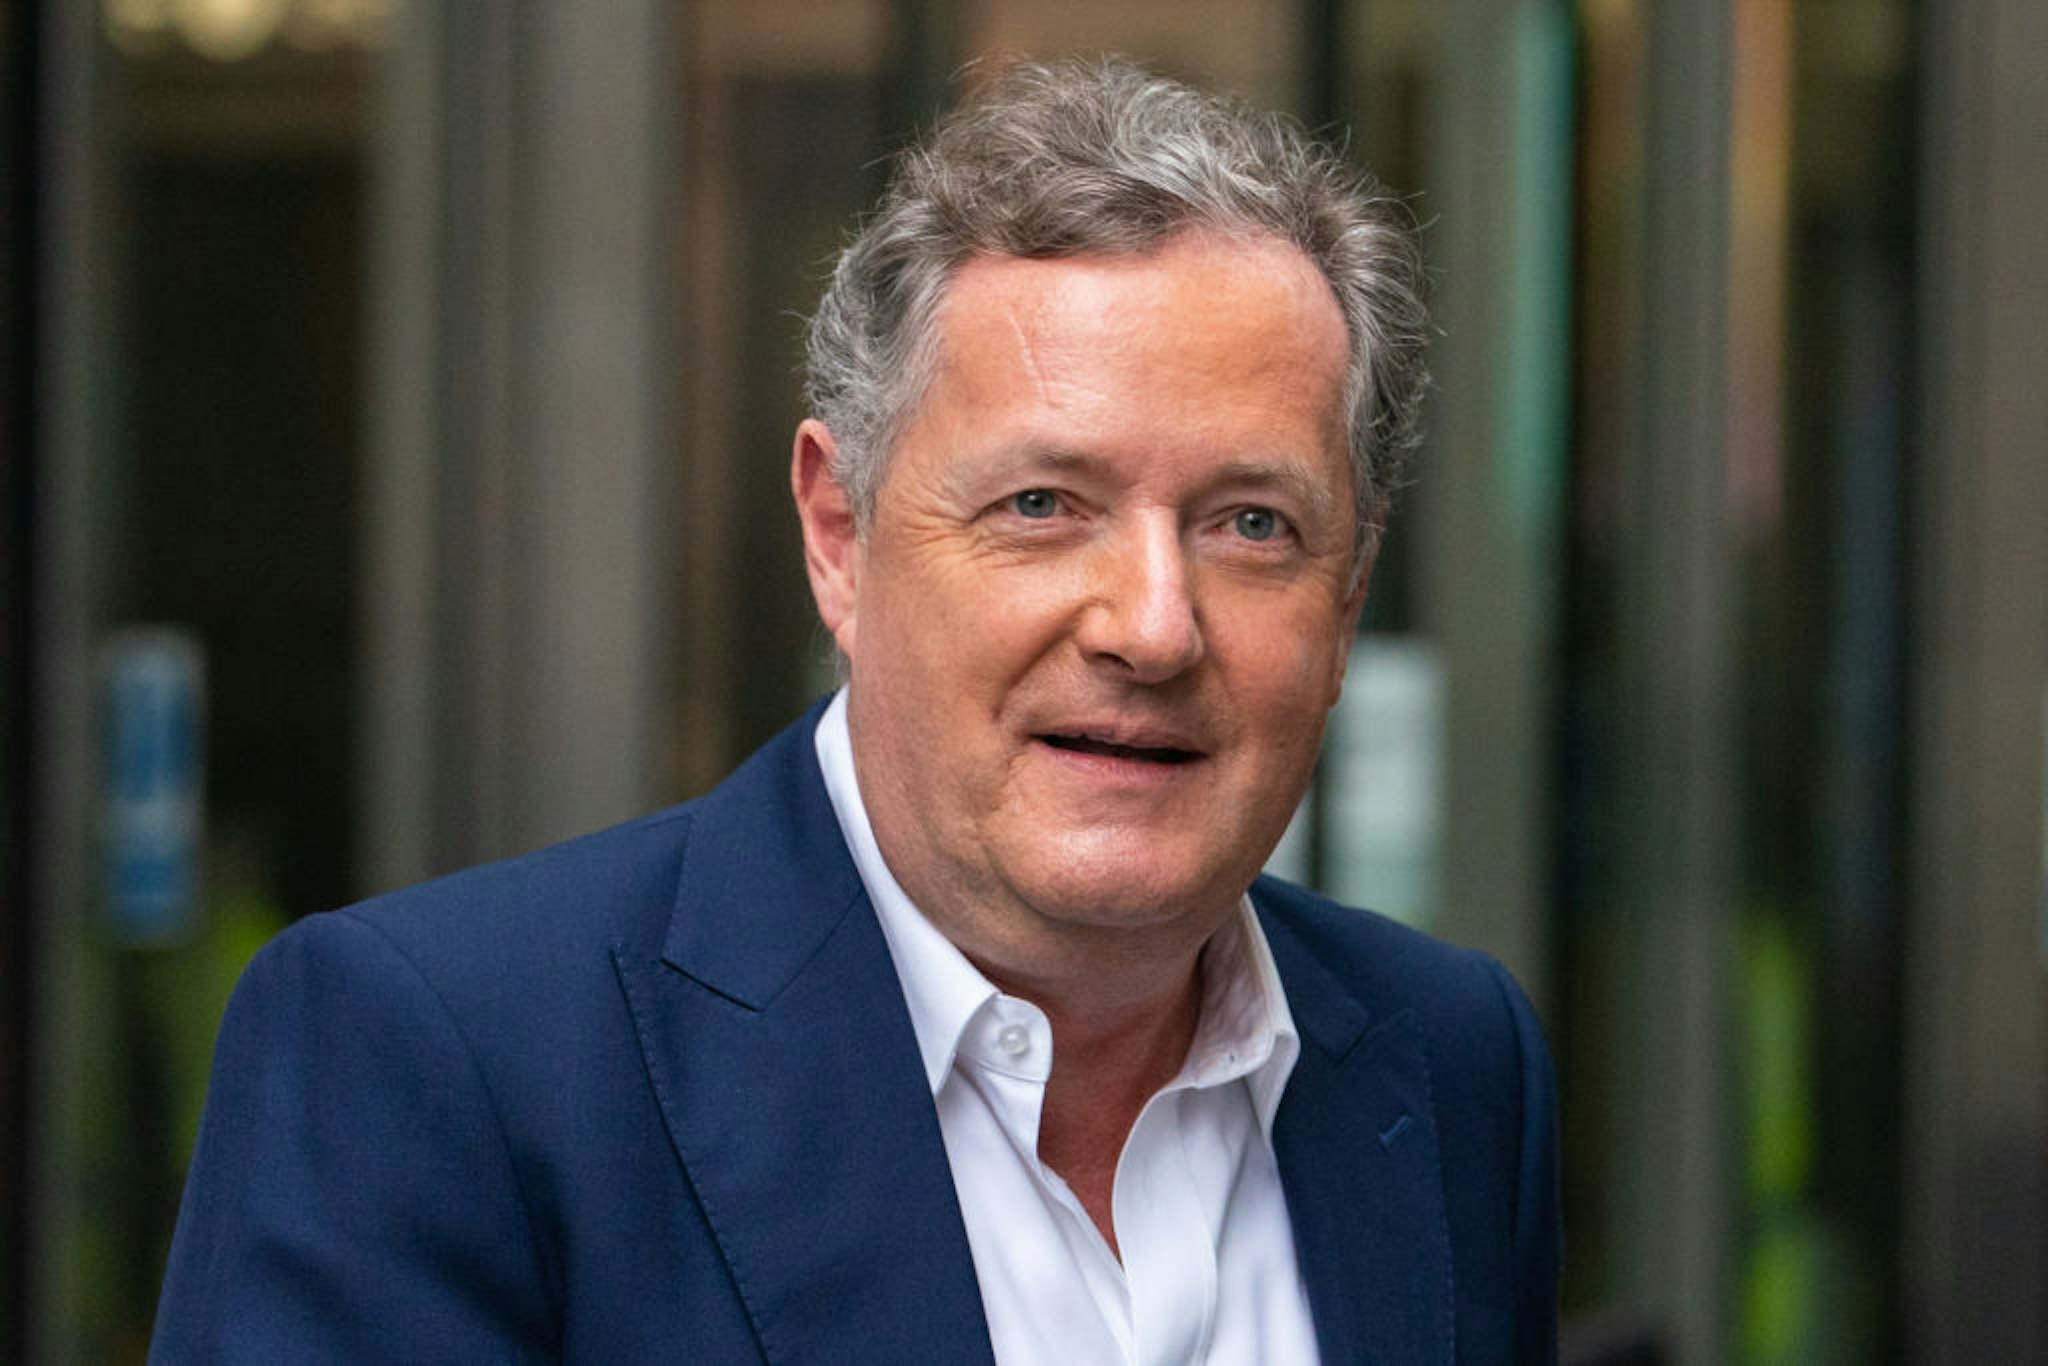 Piers Morgan leaves BBC Broadcasting House, London, after appearing on the BBC One current affairs programme, Sunday Morning. Picture date: Sunday January 16, 2022. (Photo by Dominic Lipinski/PA Images via Getty Images)